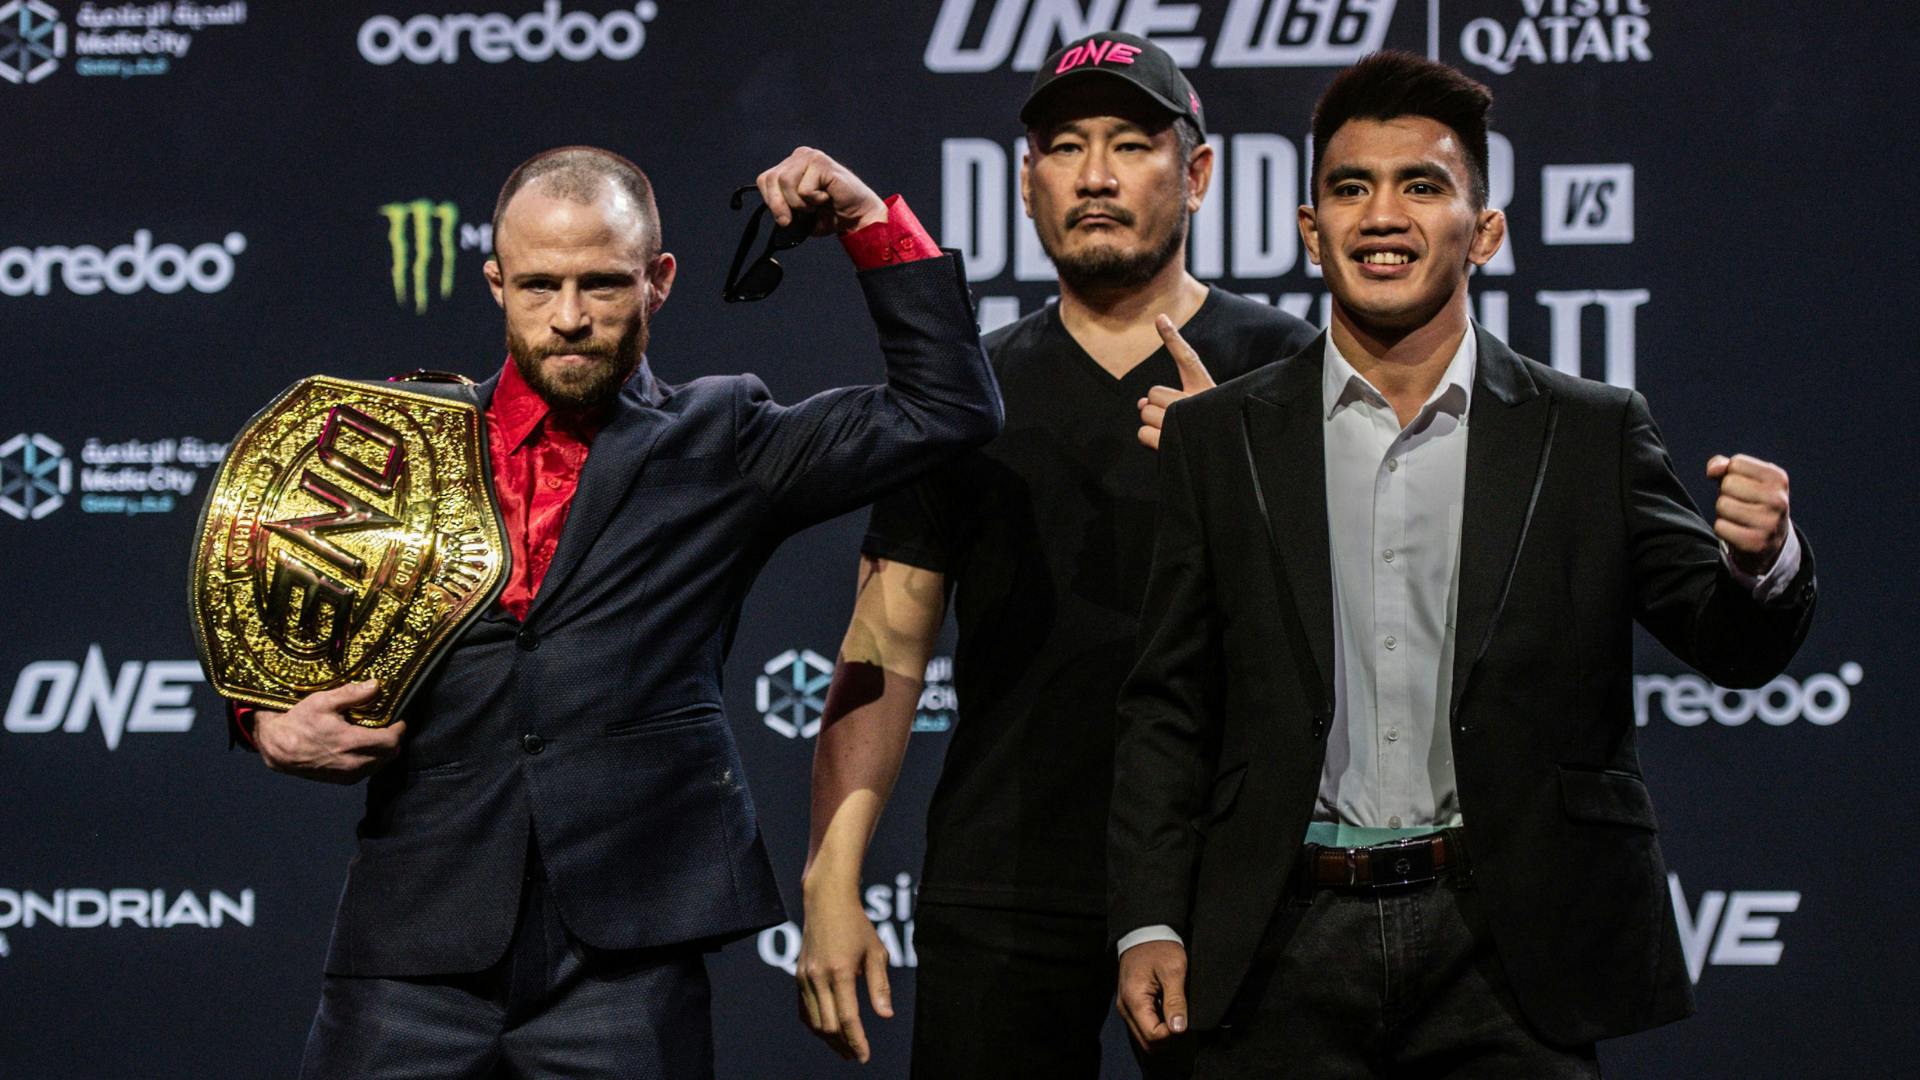 Talk is over: Joshua Pacio, Jarred Brooks ready for long-awaited rematch at ONE 166: Qatar